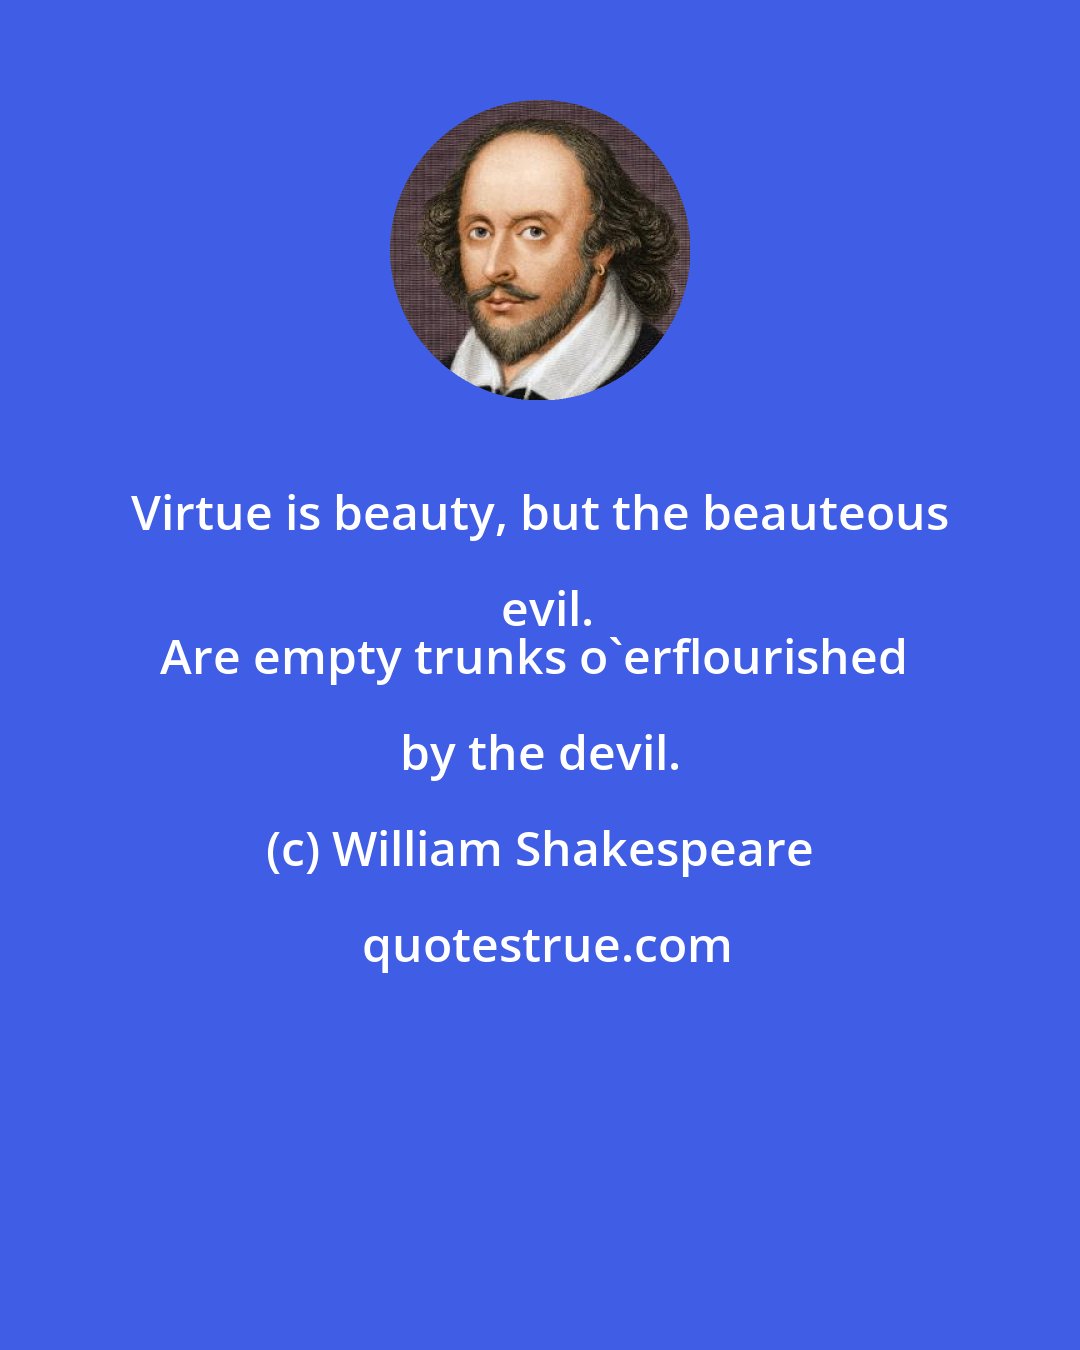 William Shakespeare: Virtue is beauty, but the beauteous evil.
Are empty trunks o'erflourished by the devil.